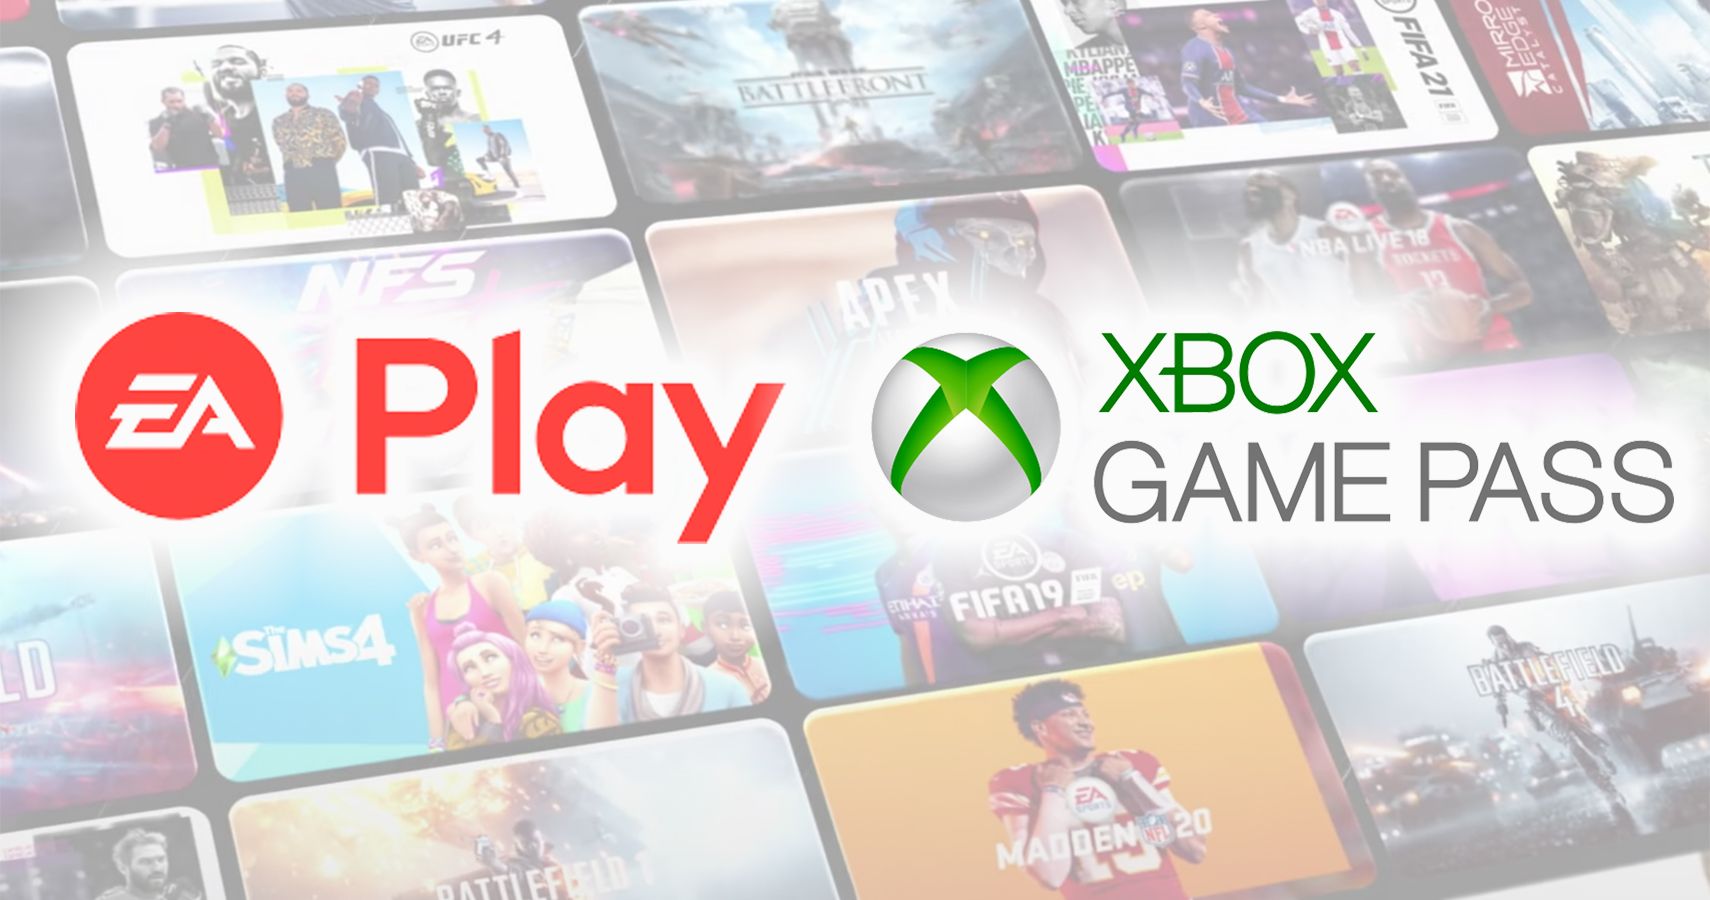 EA Play Coming To Xbox Game Pass This Holiday Season (For Free)